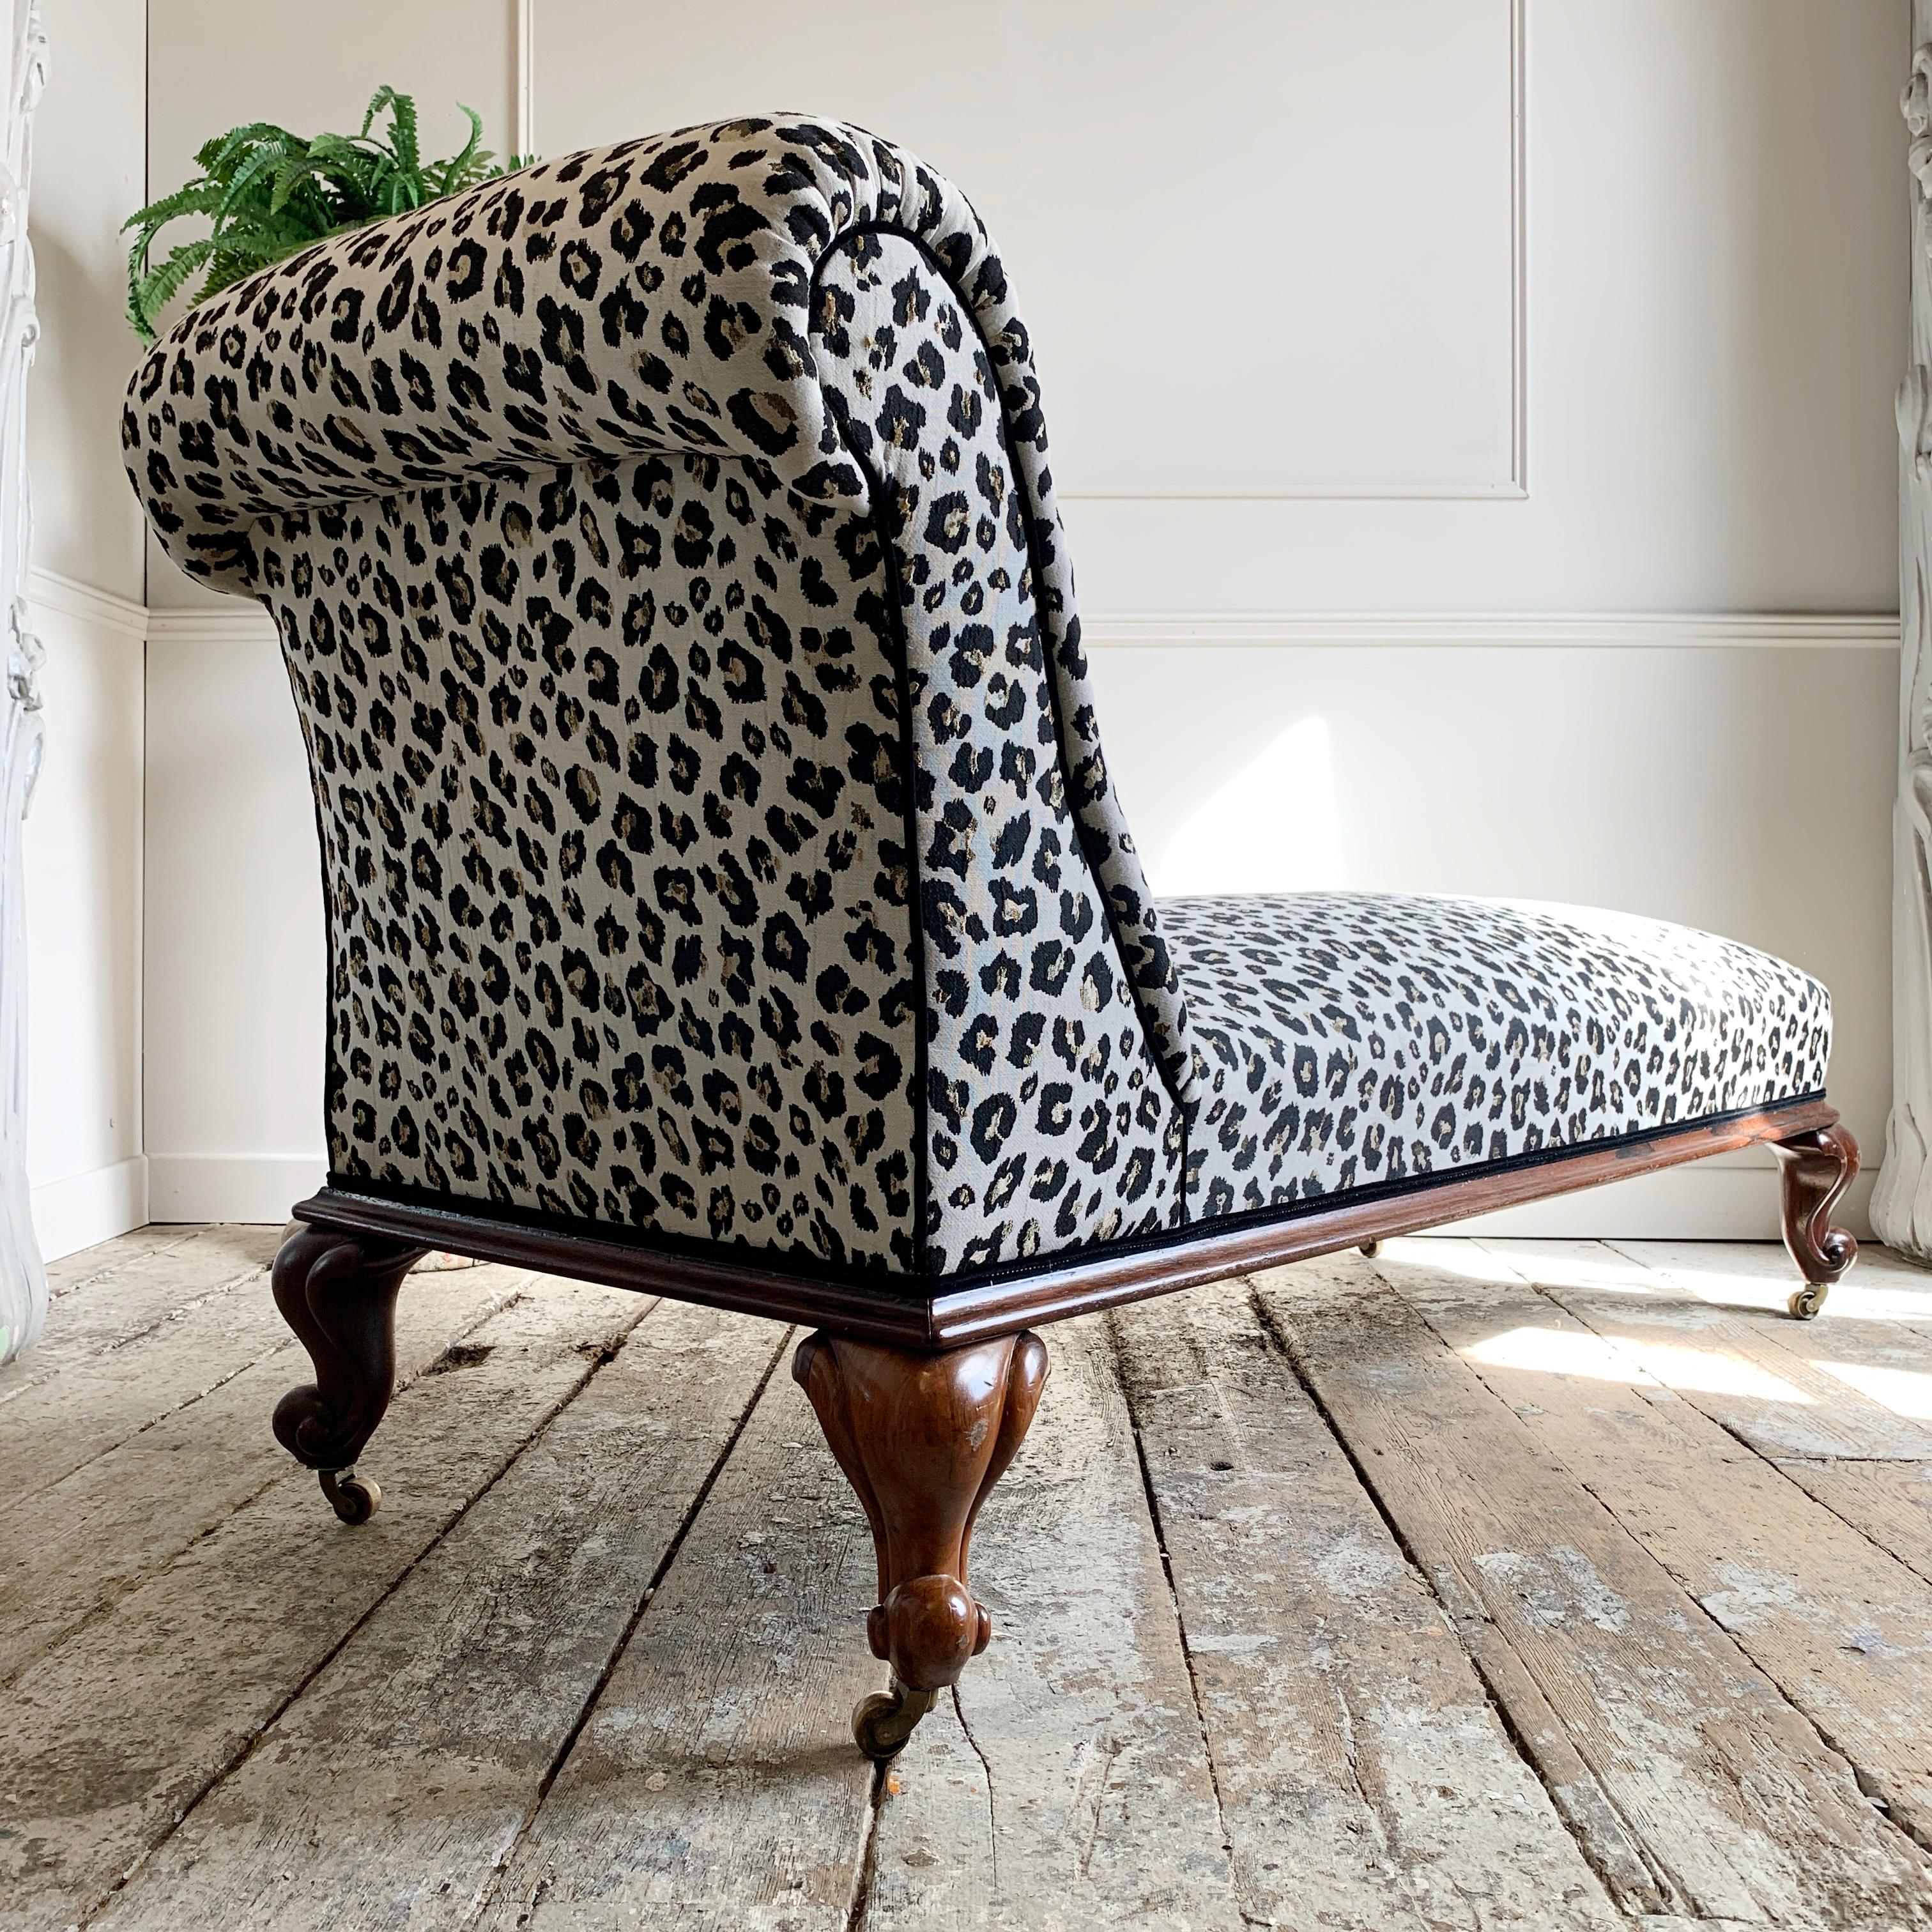 Antique Victorian Chaise Longue in Woven Leopard Jacquard In Fair Condition For Sale In Hastings, GB